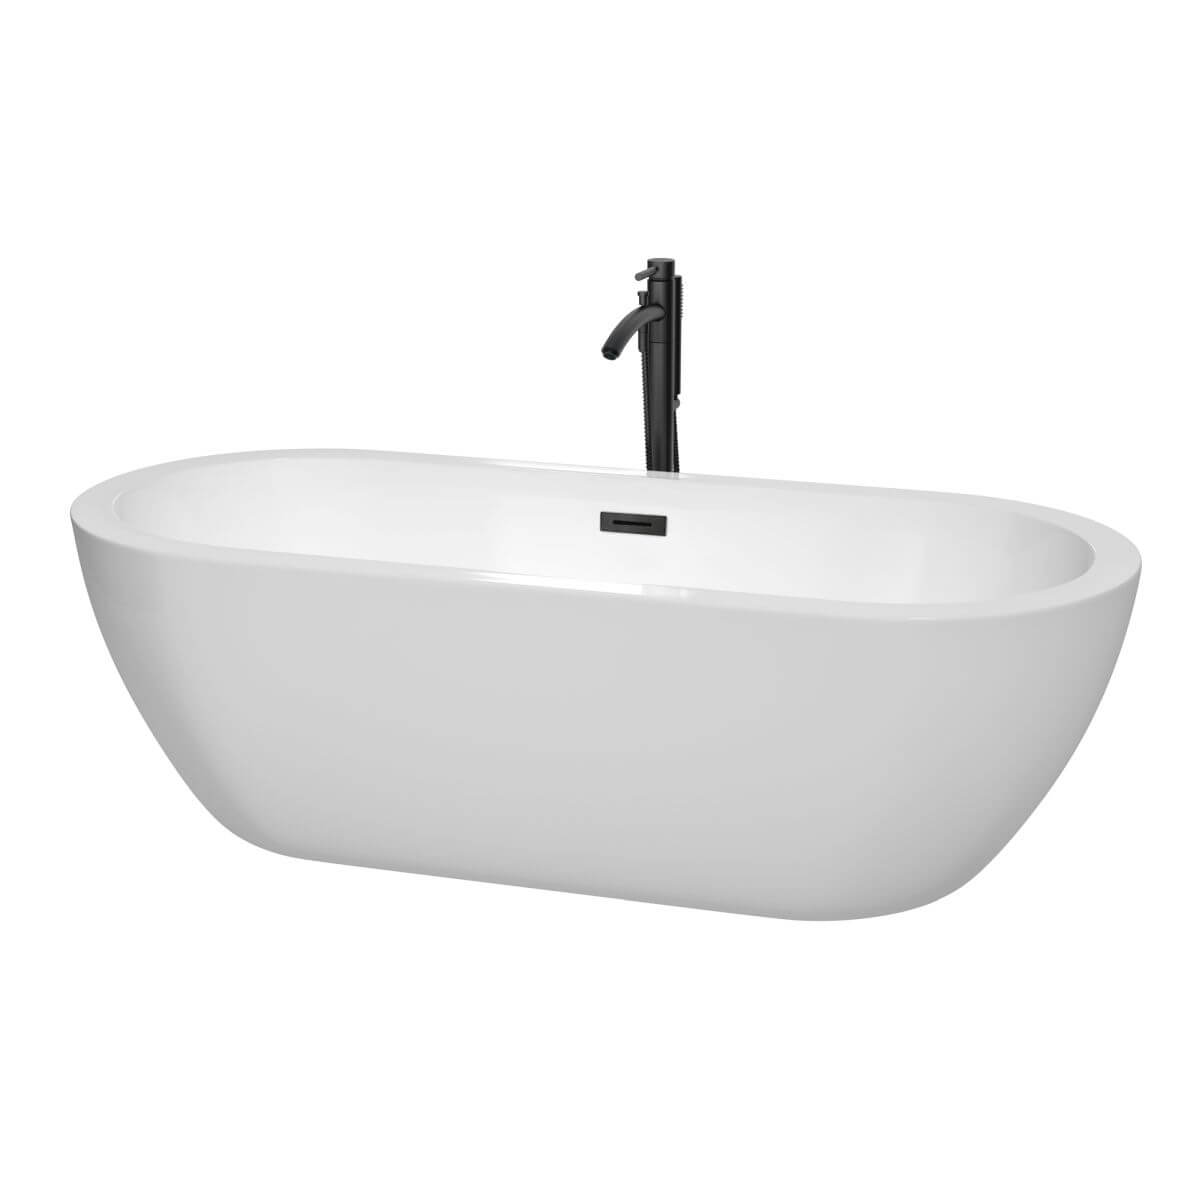 Wyndham Collection Soho 72 inch Freestanding Bathtub in White with Floor Mounted Faucet, Drain and Overflow Trim in Matte Black - WCOBT100272MBATPBK